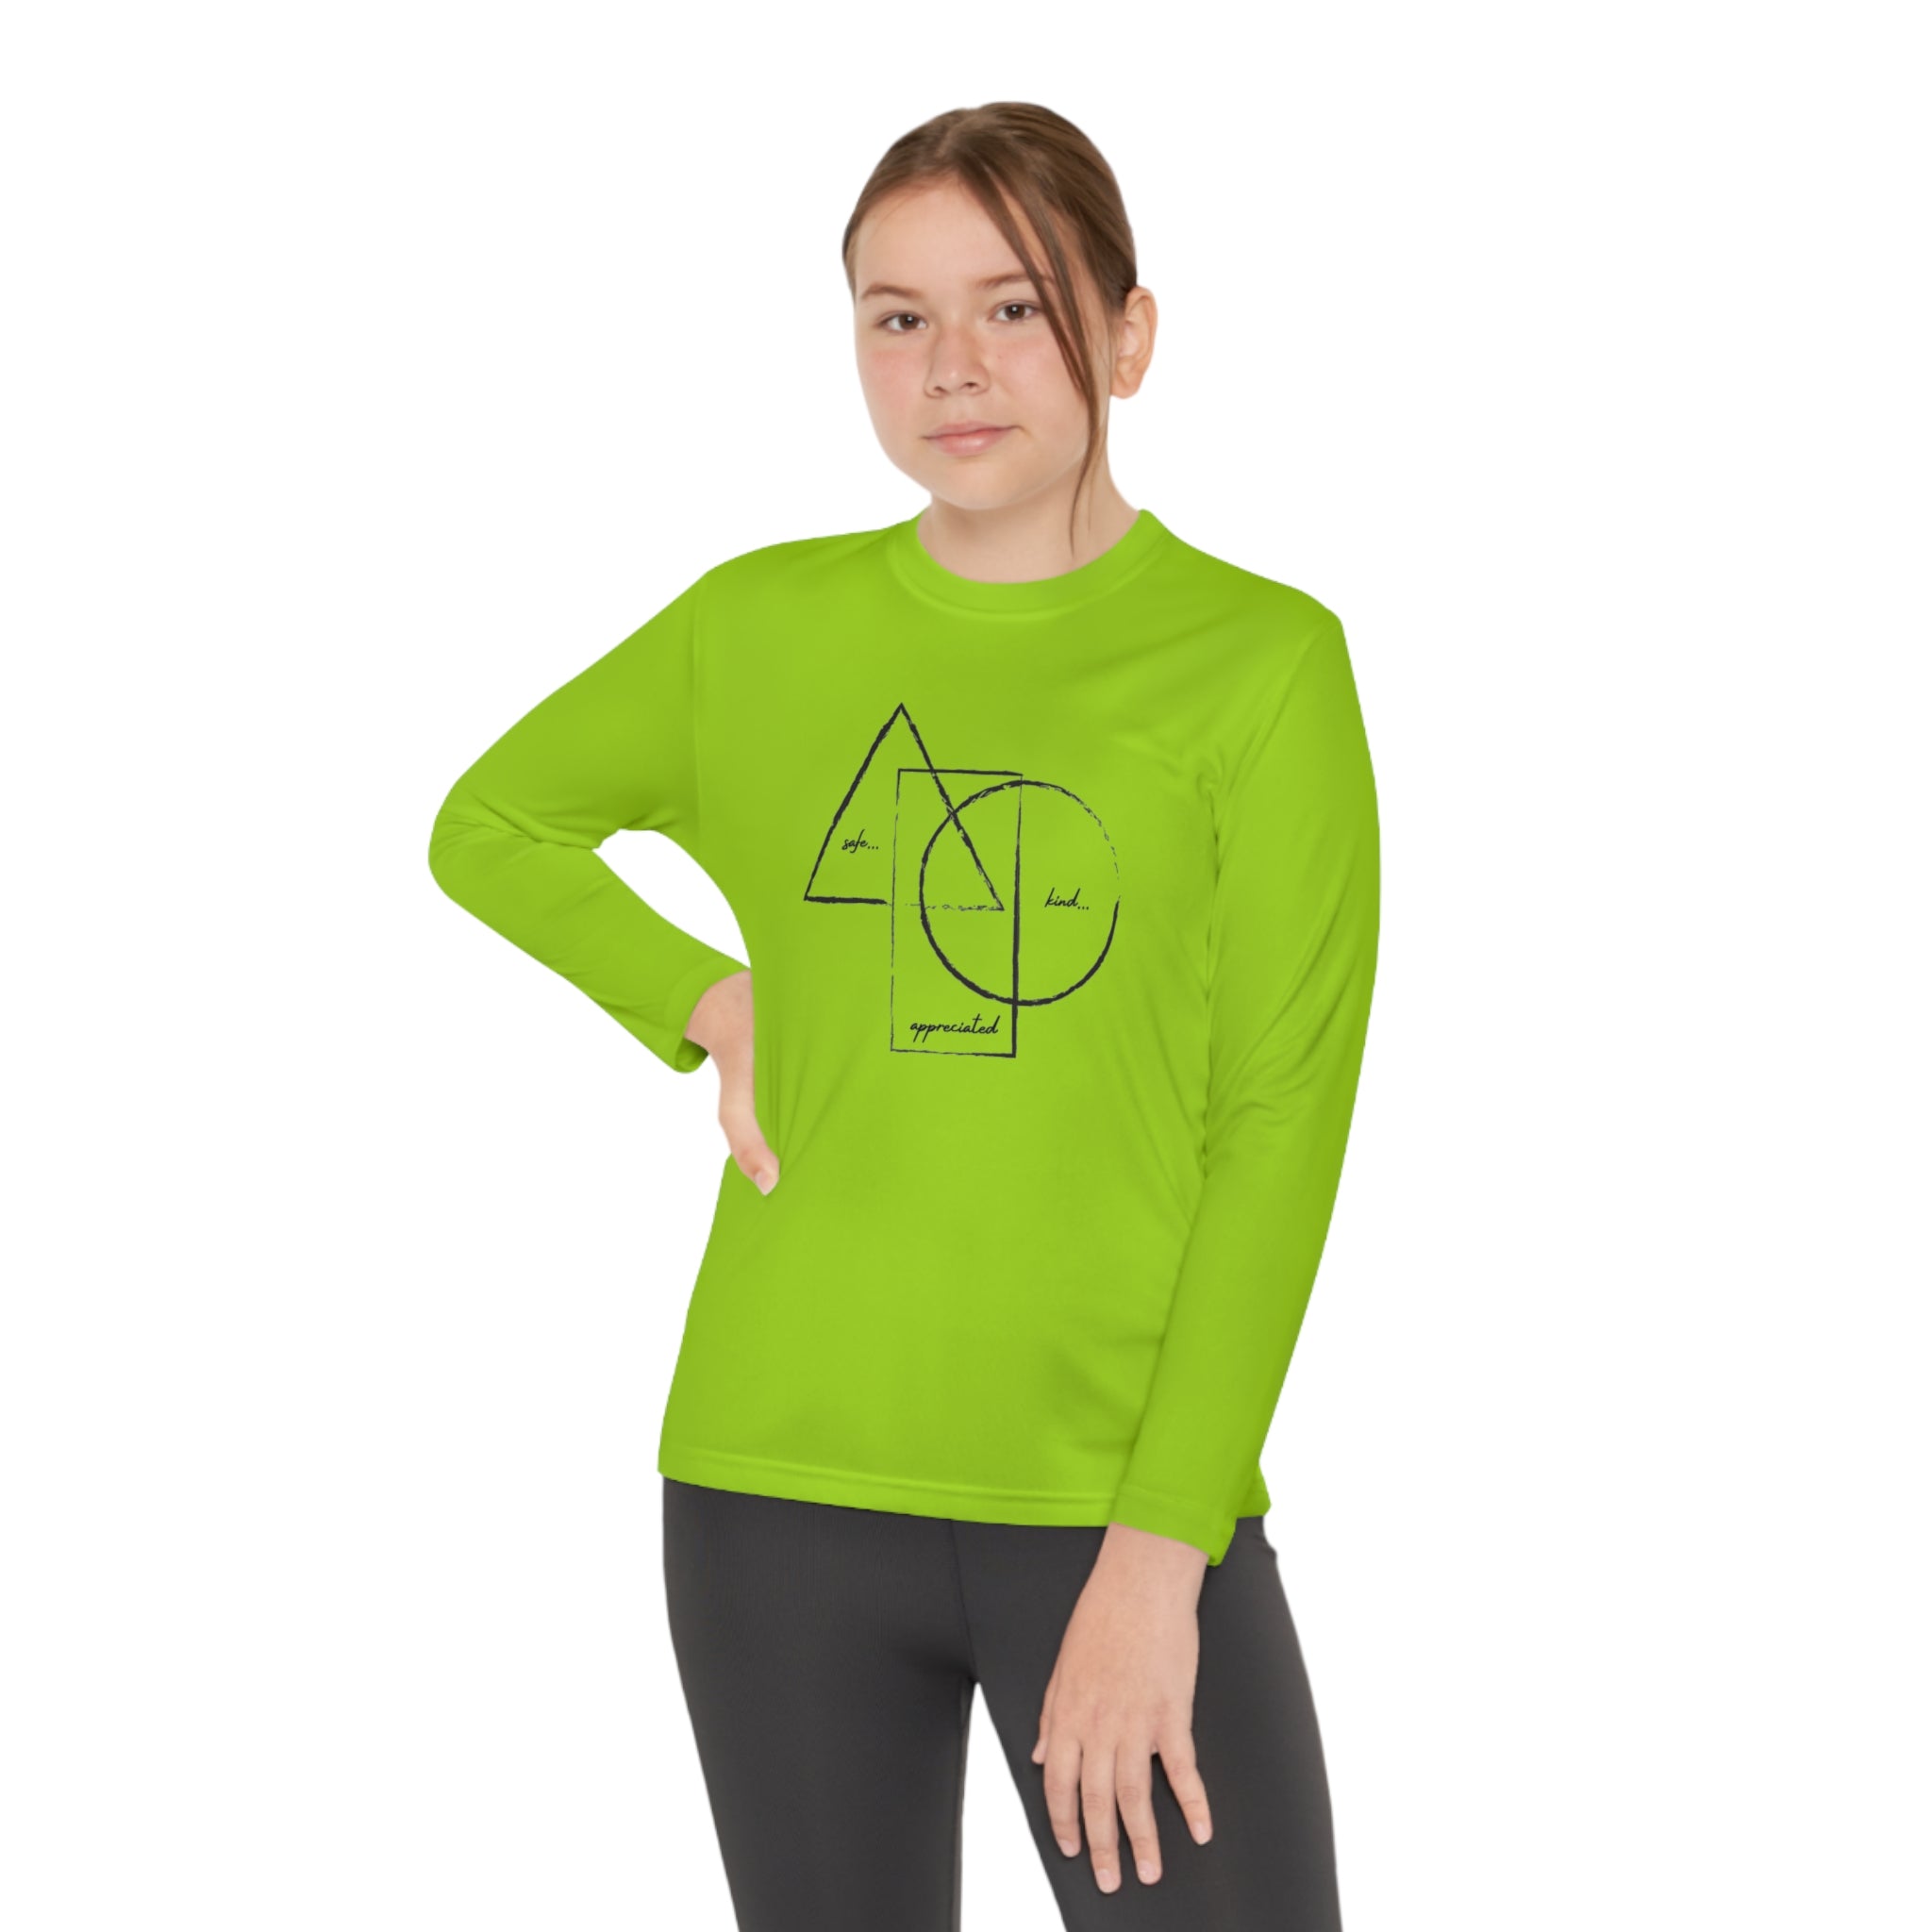 BE/KNOW Youth Long Sleeve Competitor Tee